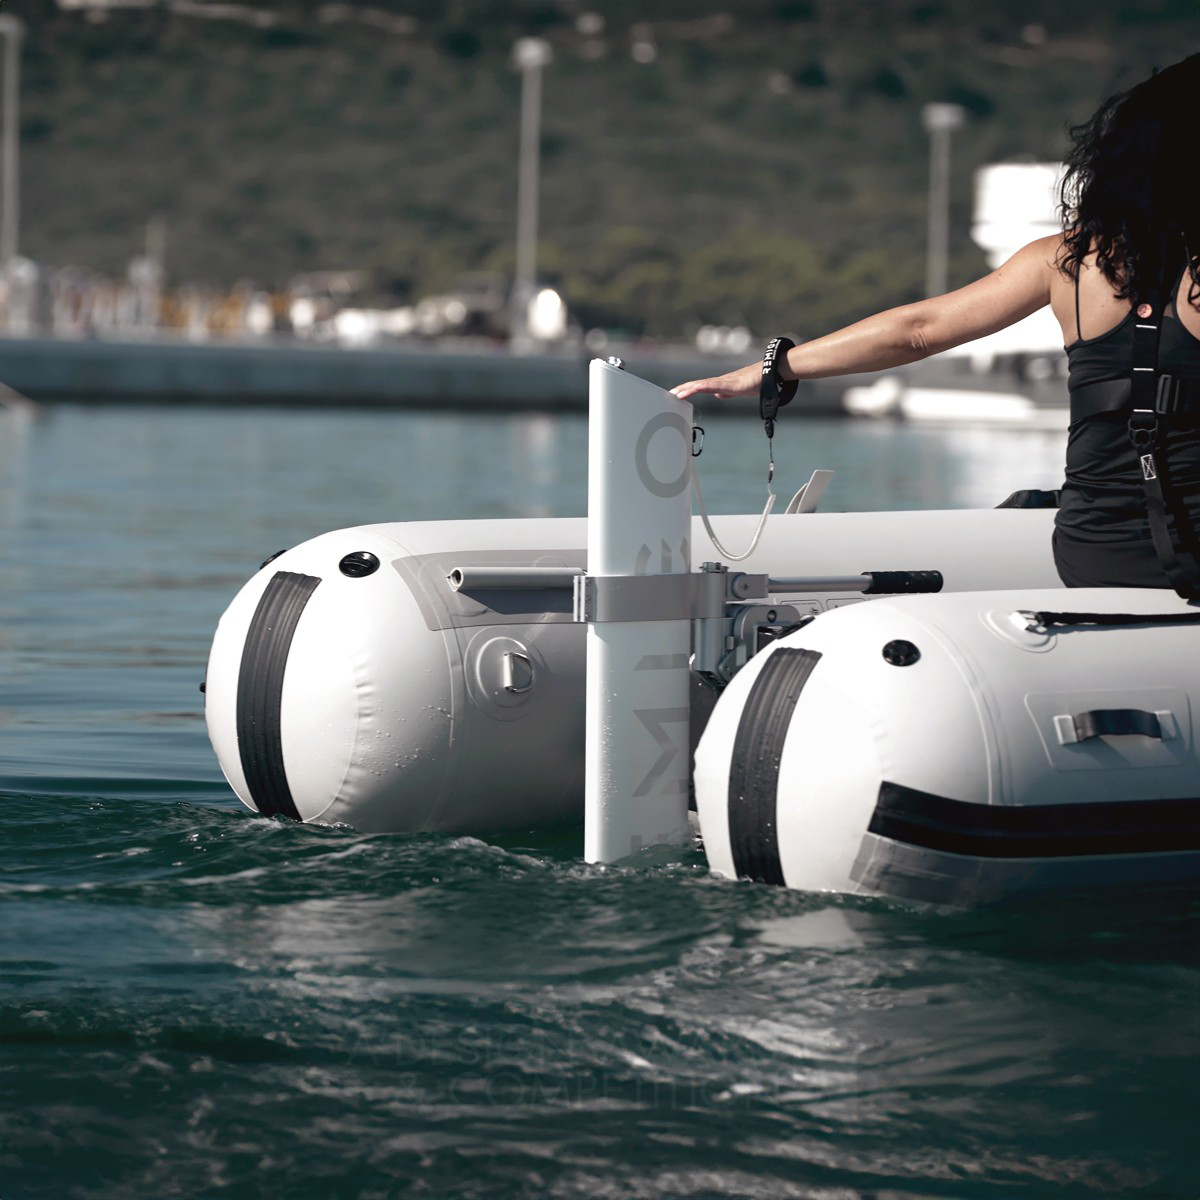 Remigo Electric Outboards wins Silver at the prestigious A' Product Engineering and Technical Design Award with Remigo One Electric Outboard Motor.